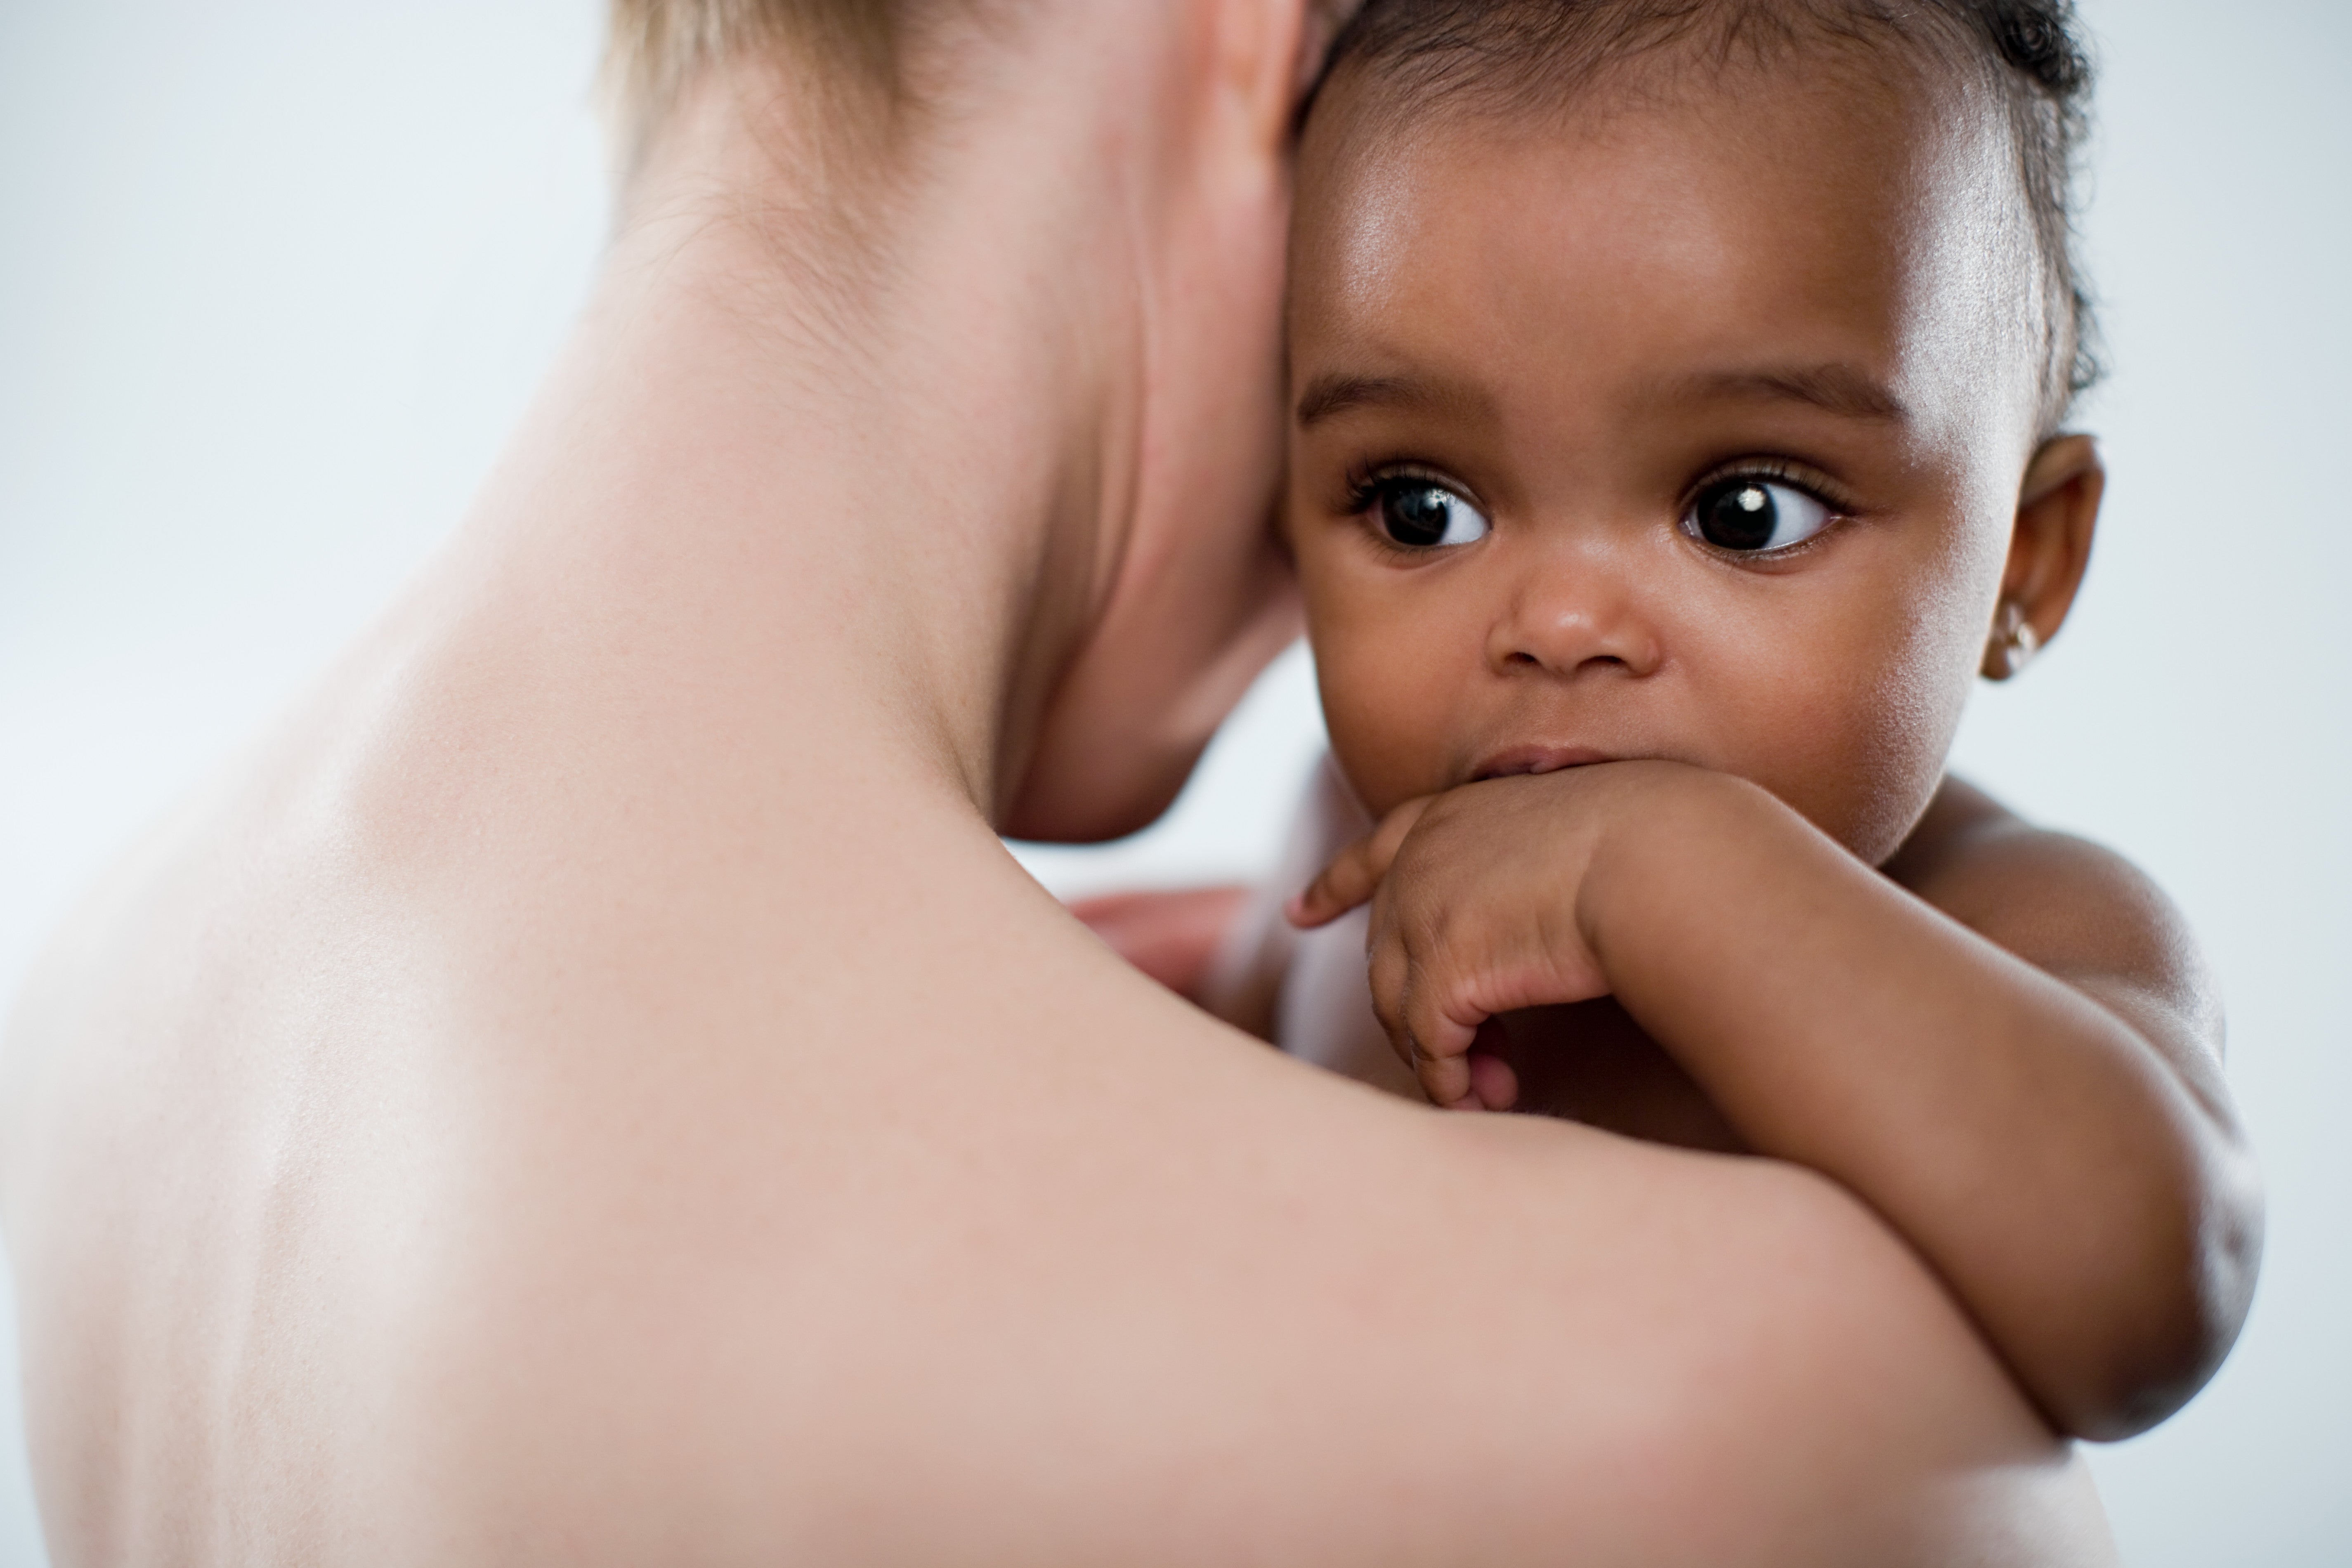 Are Interracial Adoptions Problematic?